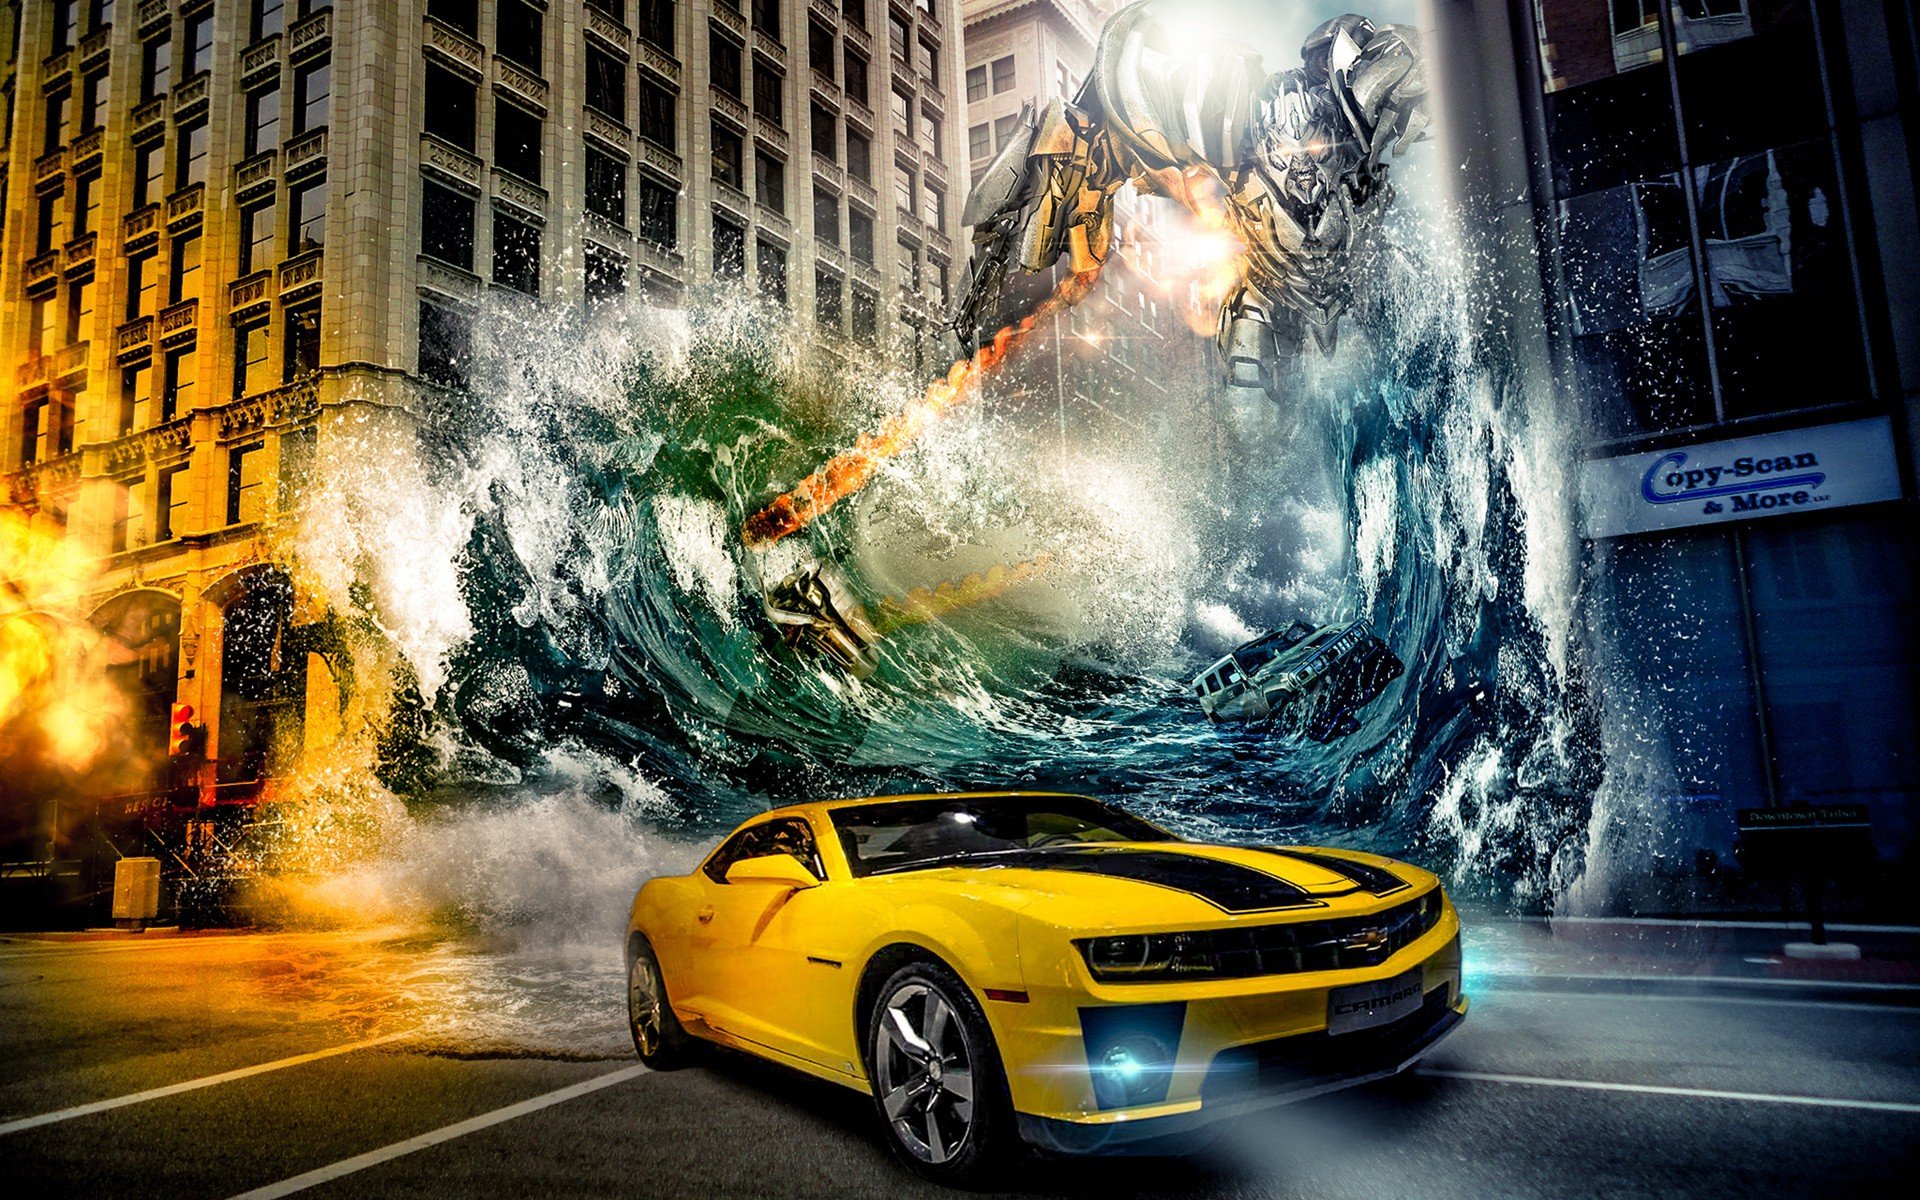 city, Cityscape, Vehicle, Movies, Transformers Wallpaper